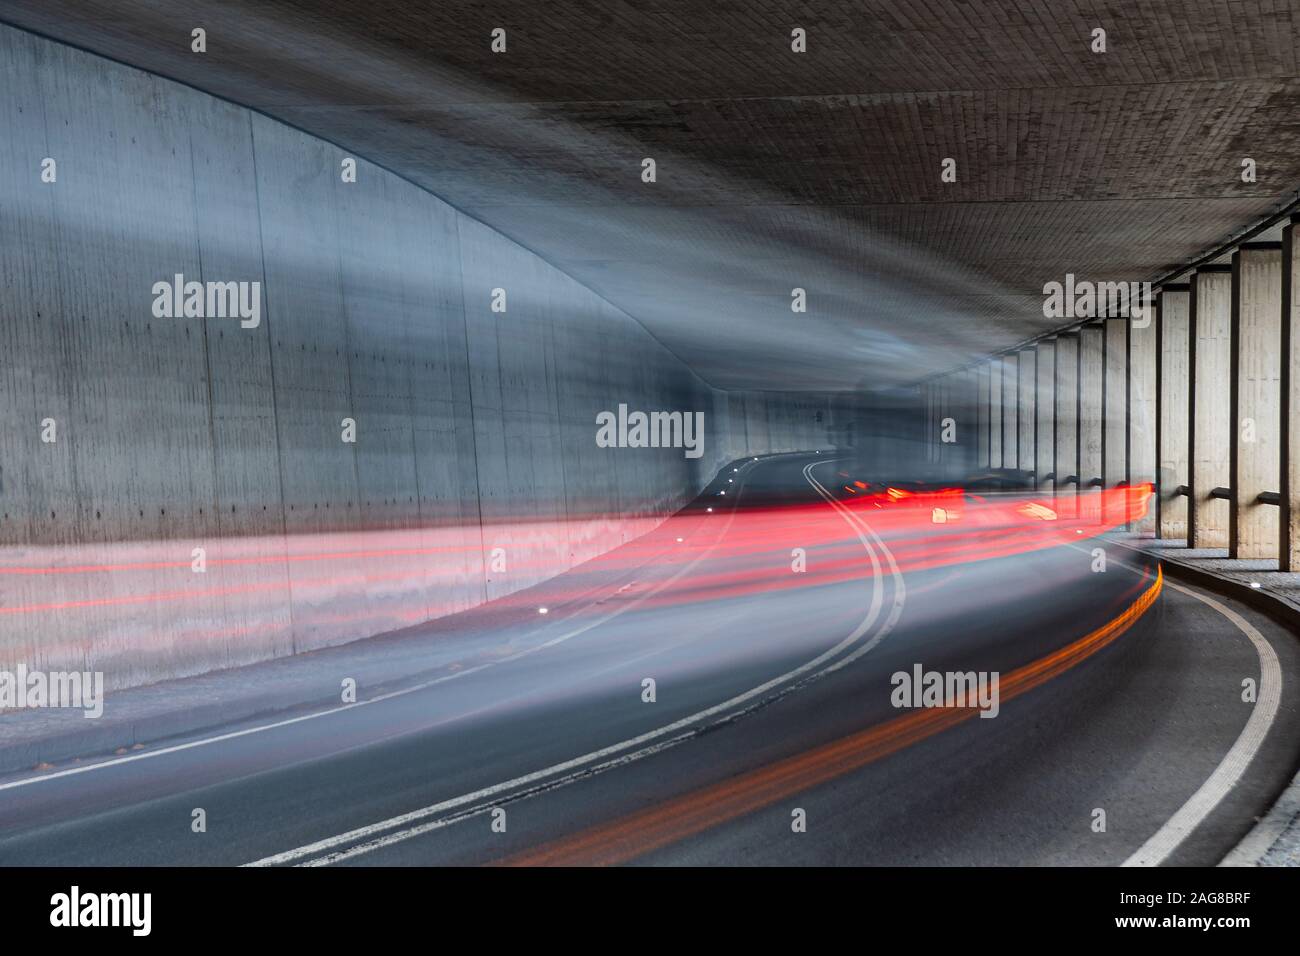 Blurry car with red rear lights driving fast through the tunnel - Long exposure Stock Photo